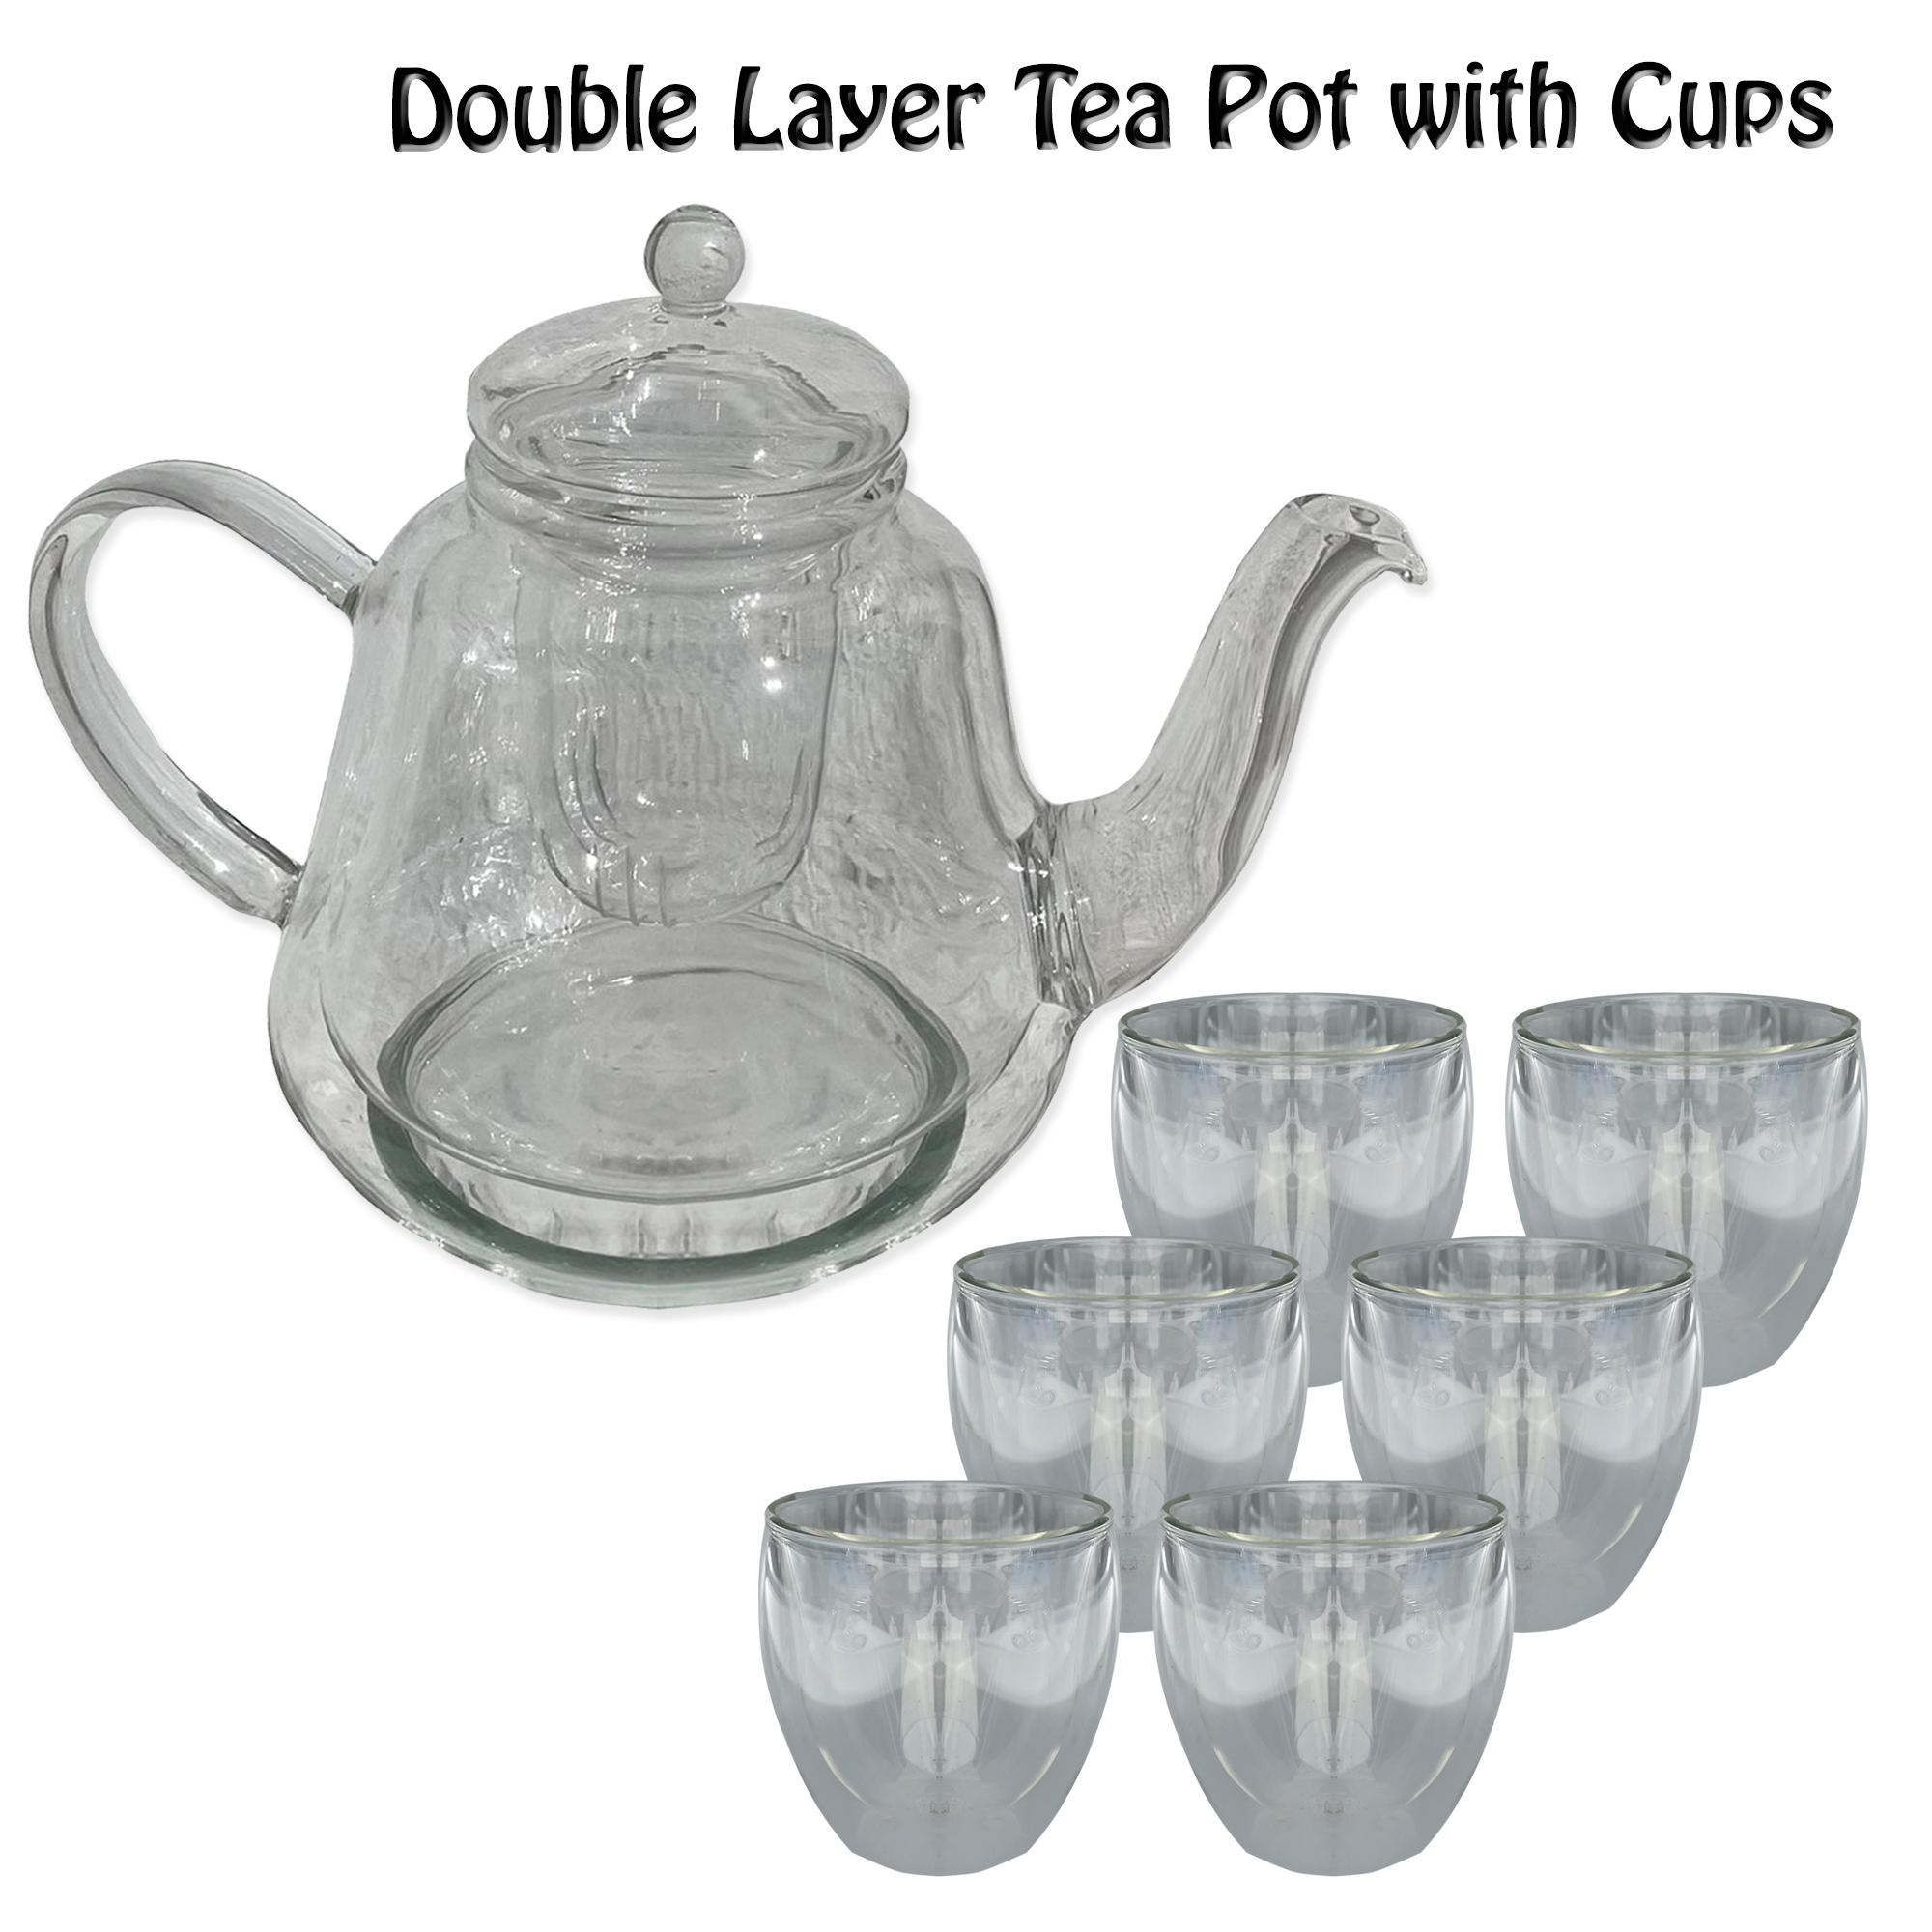 Set of Oval Shaped Double Layer Glass Teapot, 530ml with Oval Shape Glass cups-200 ML (set of 6 glasses). Teapot with Infuser and Lid, Heatproof handle